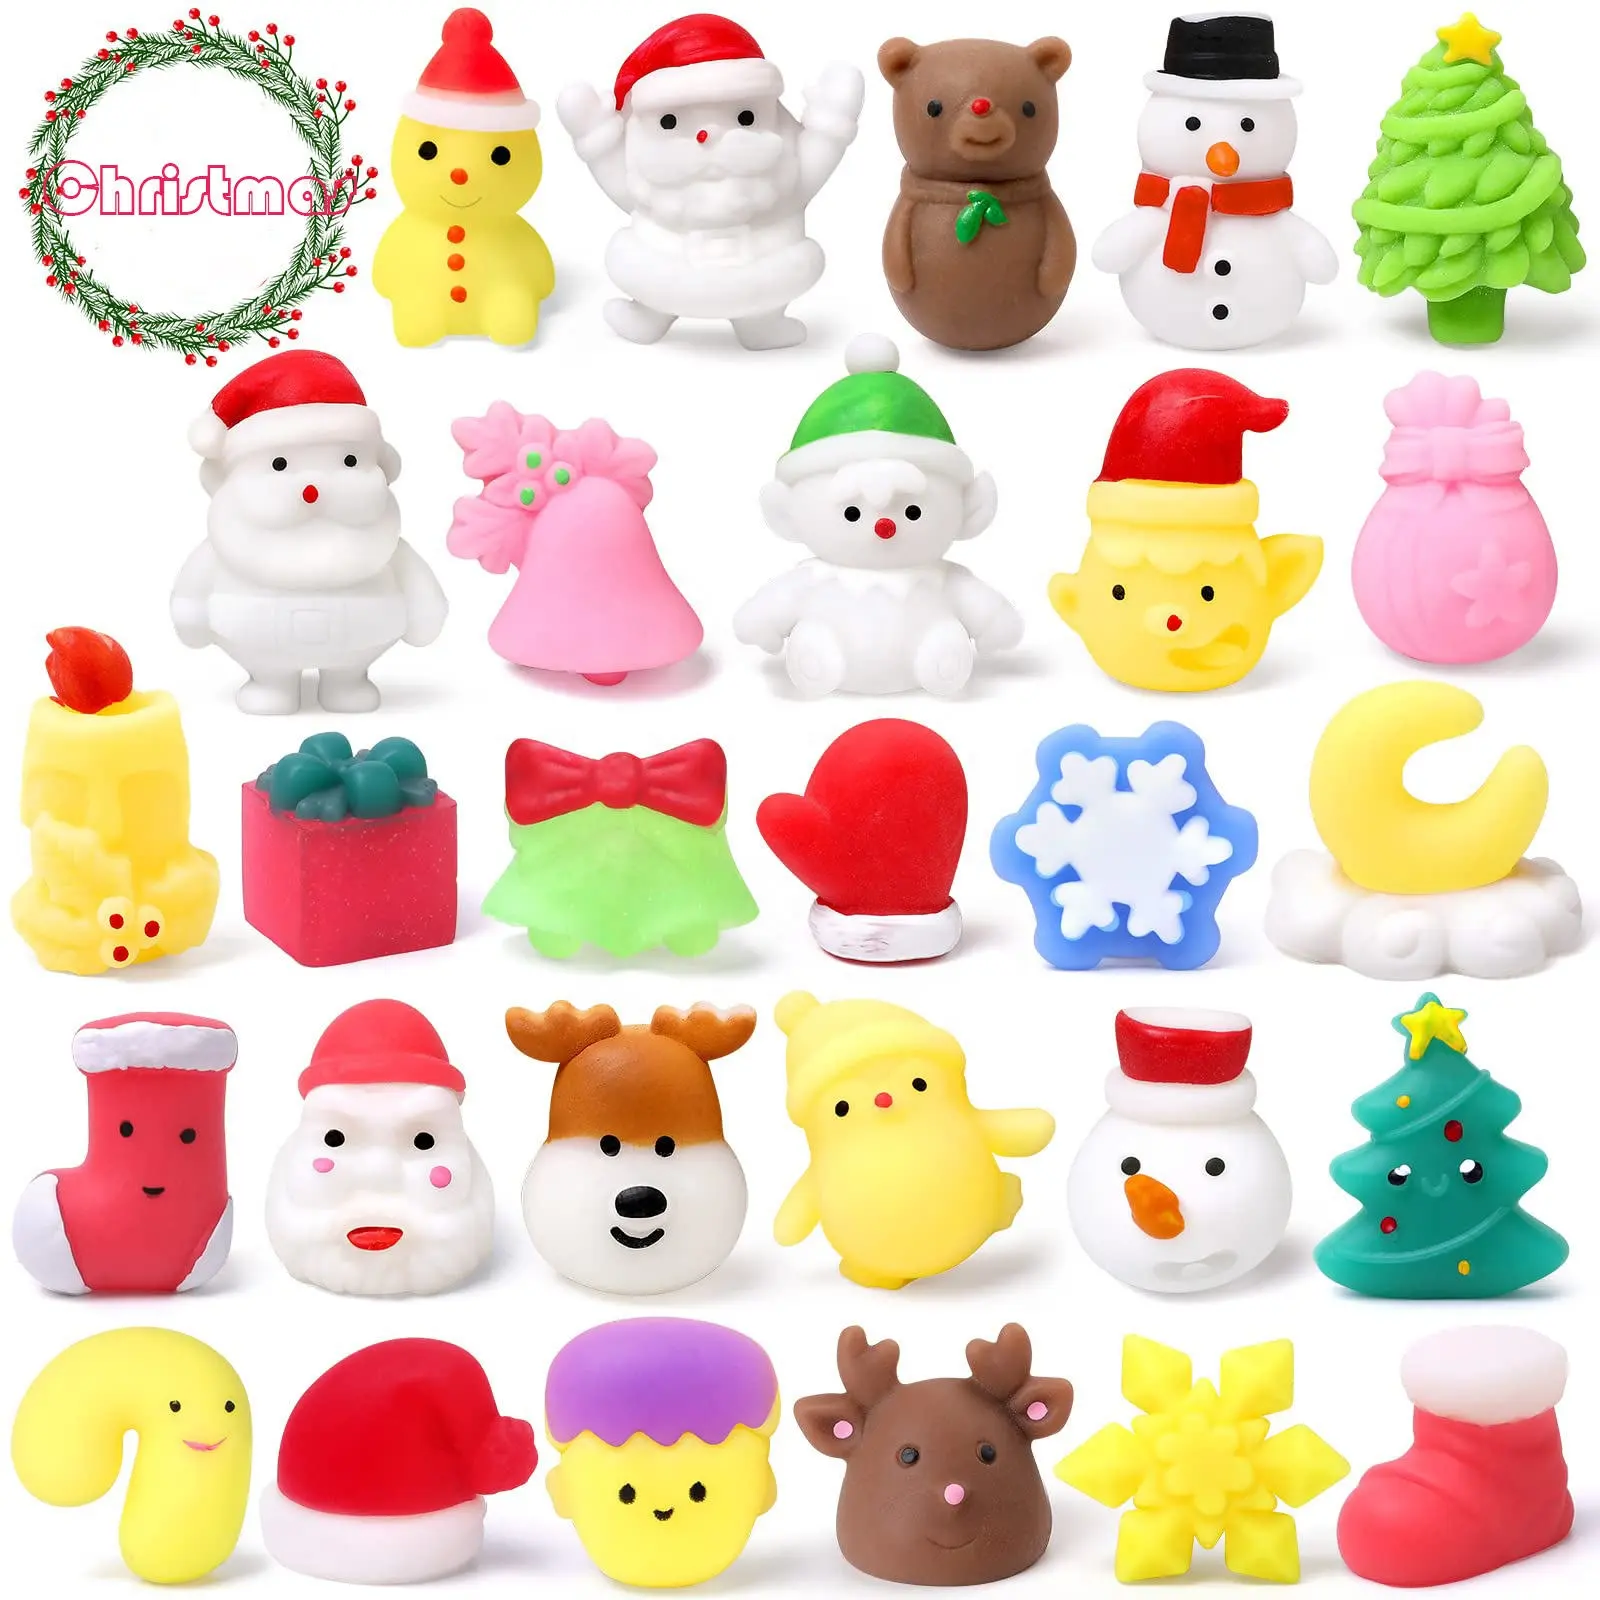 Amazon Hot Mochi Squishy Toys Promotional Christmas Gift Collection Cute Kawaii Squeeze Toy Squishy Animal Squishy Mochi